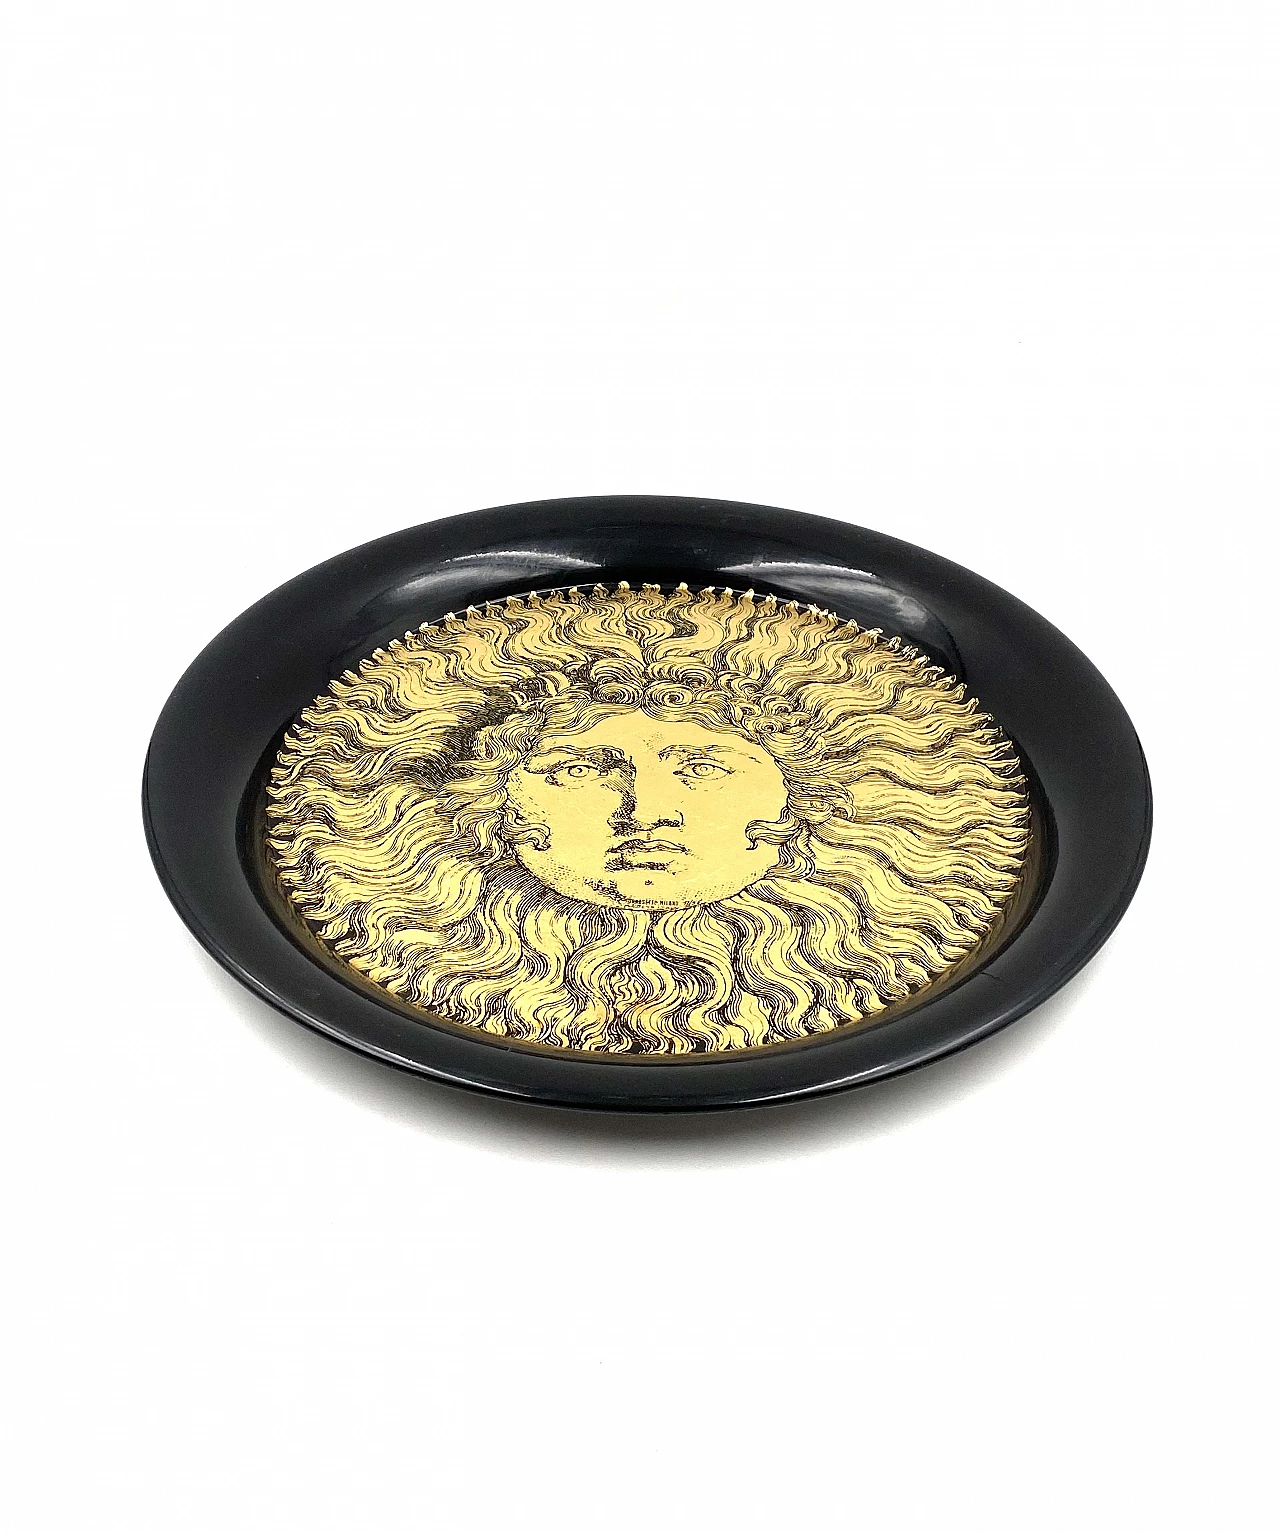 Metal Re Sole tray by Piero Fornasetti, 1950s 21